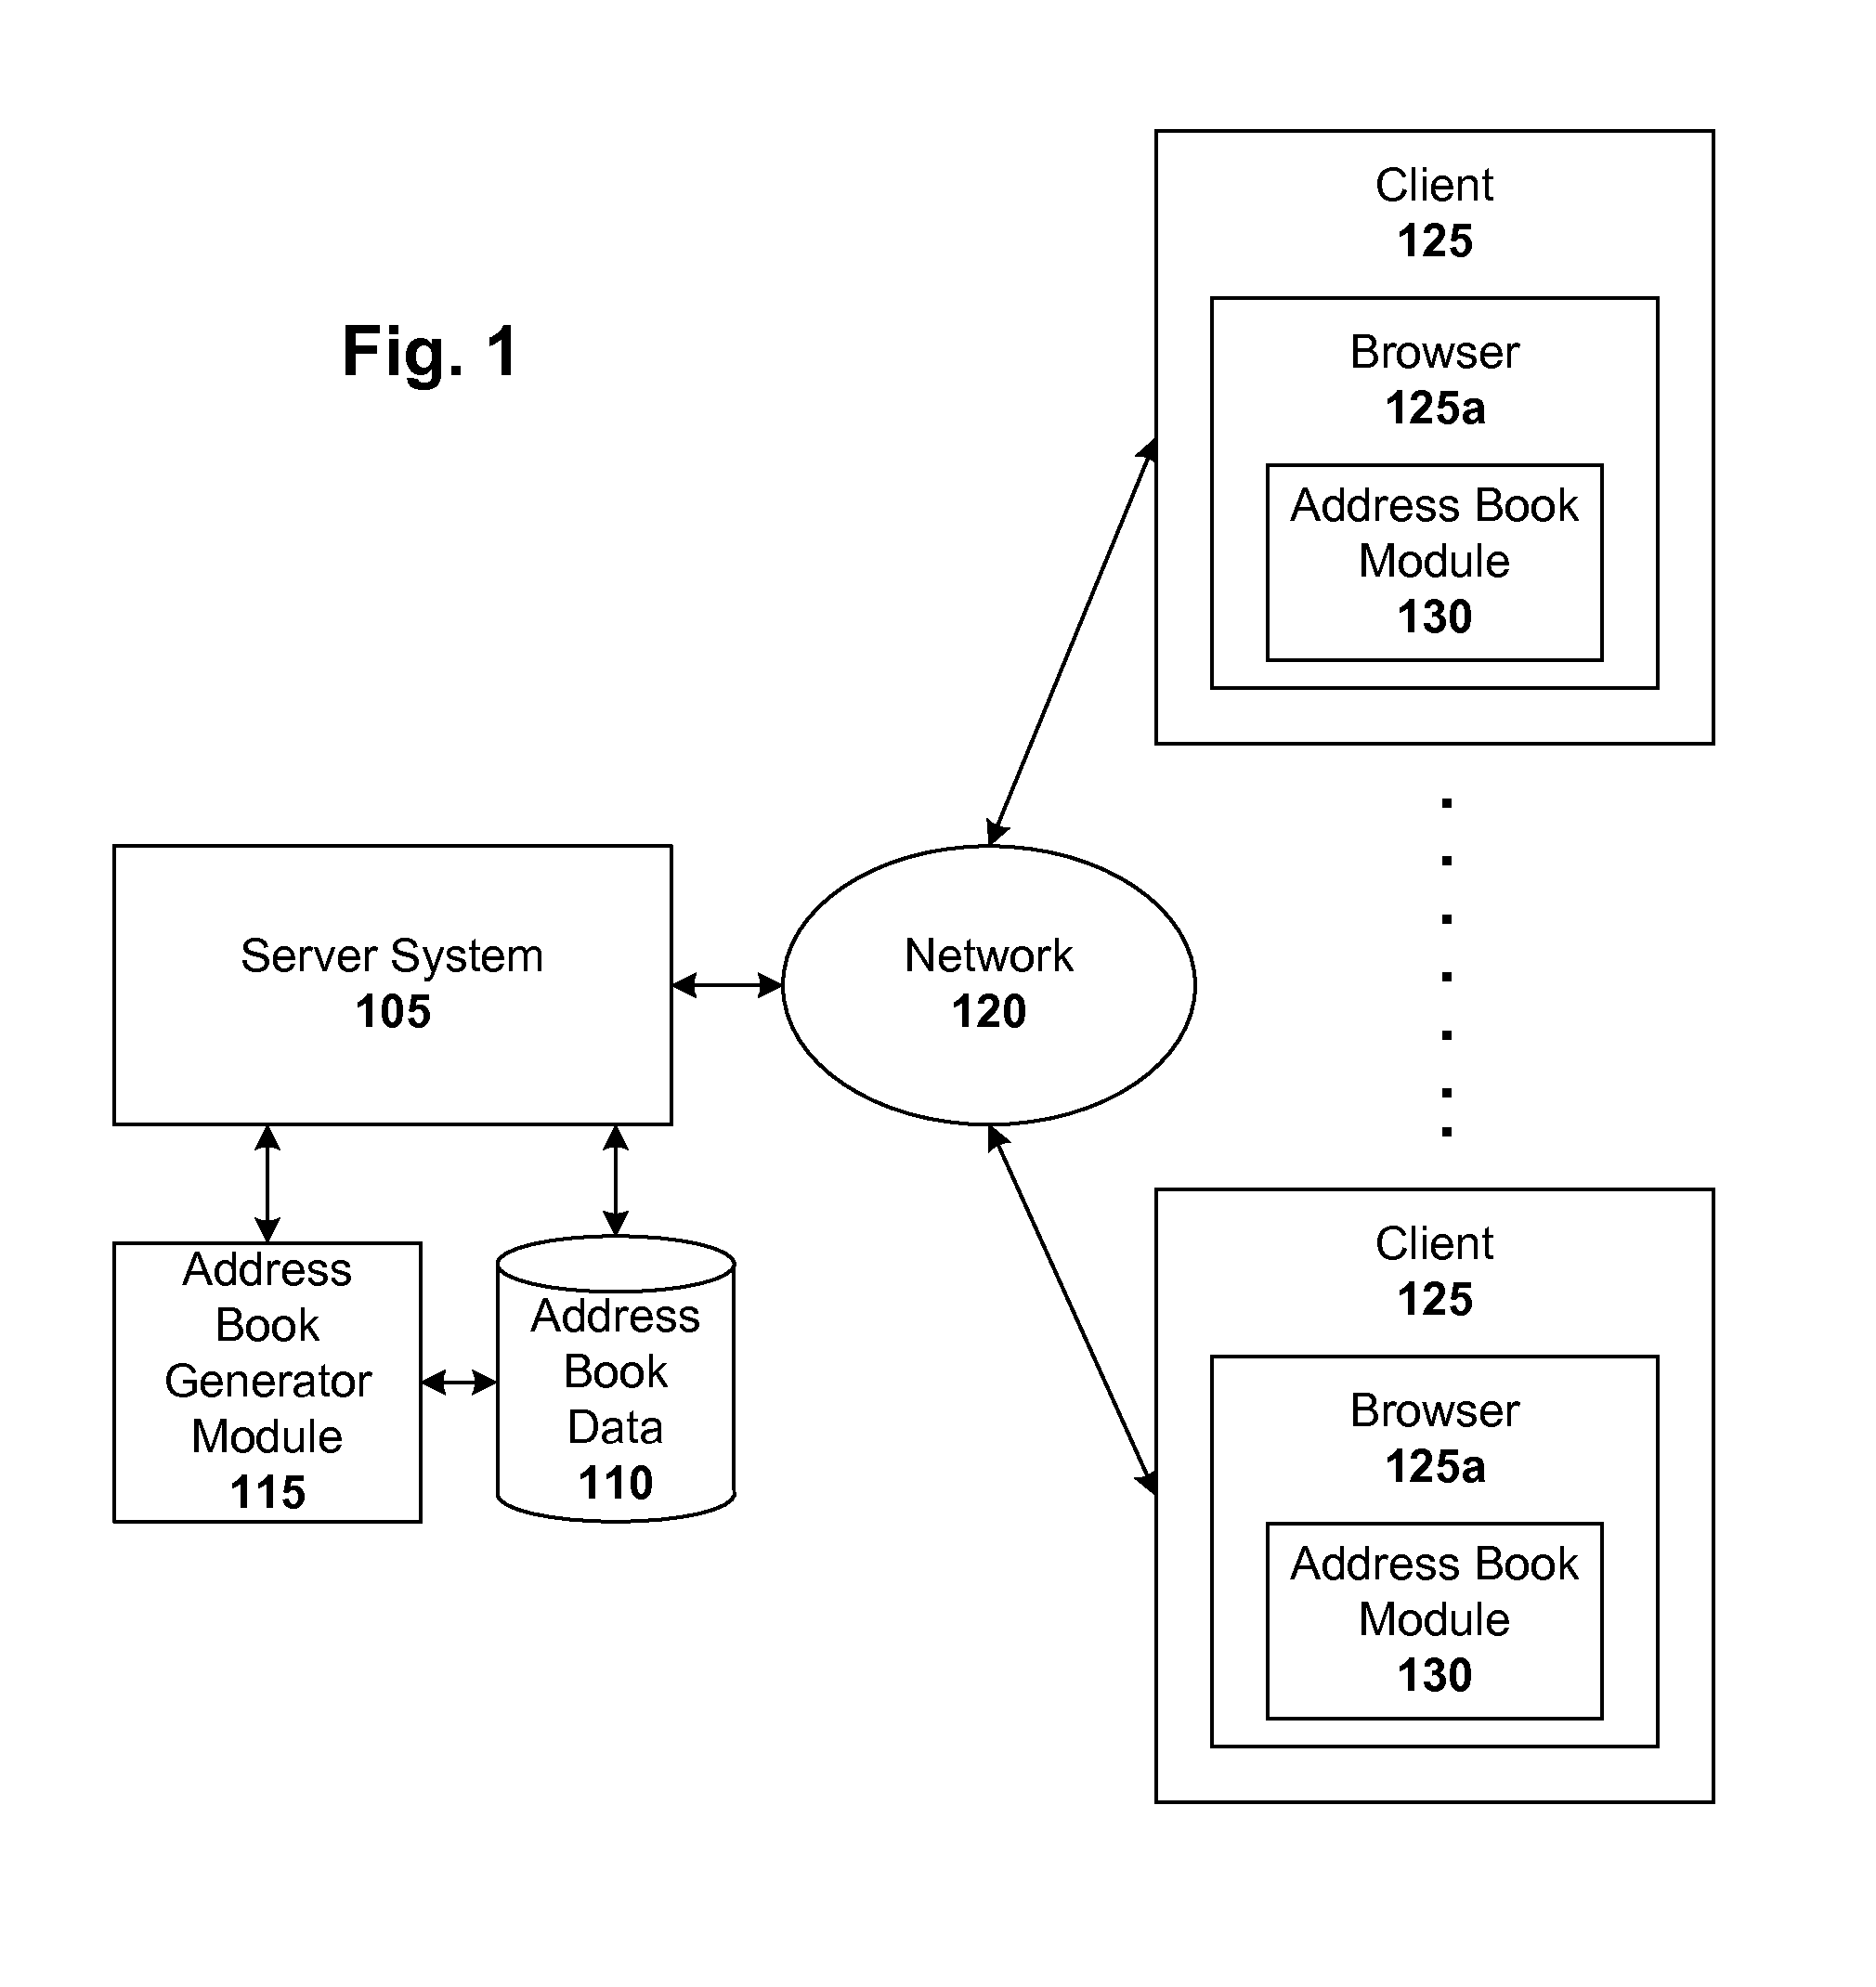 Automatically maintaining an address book